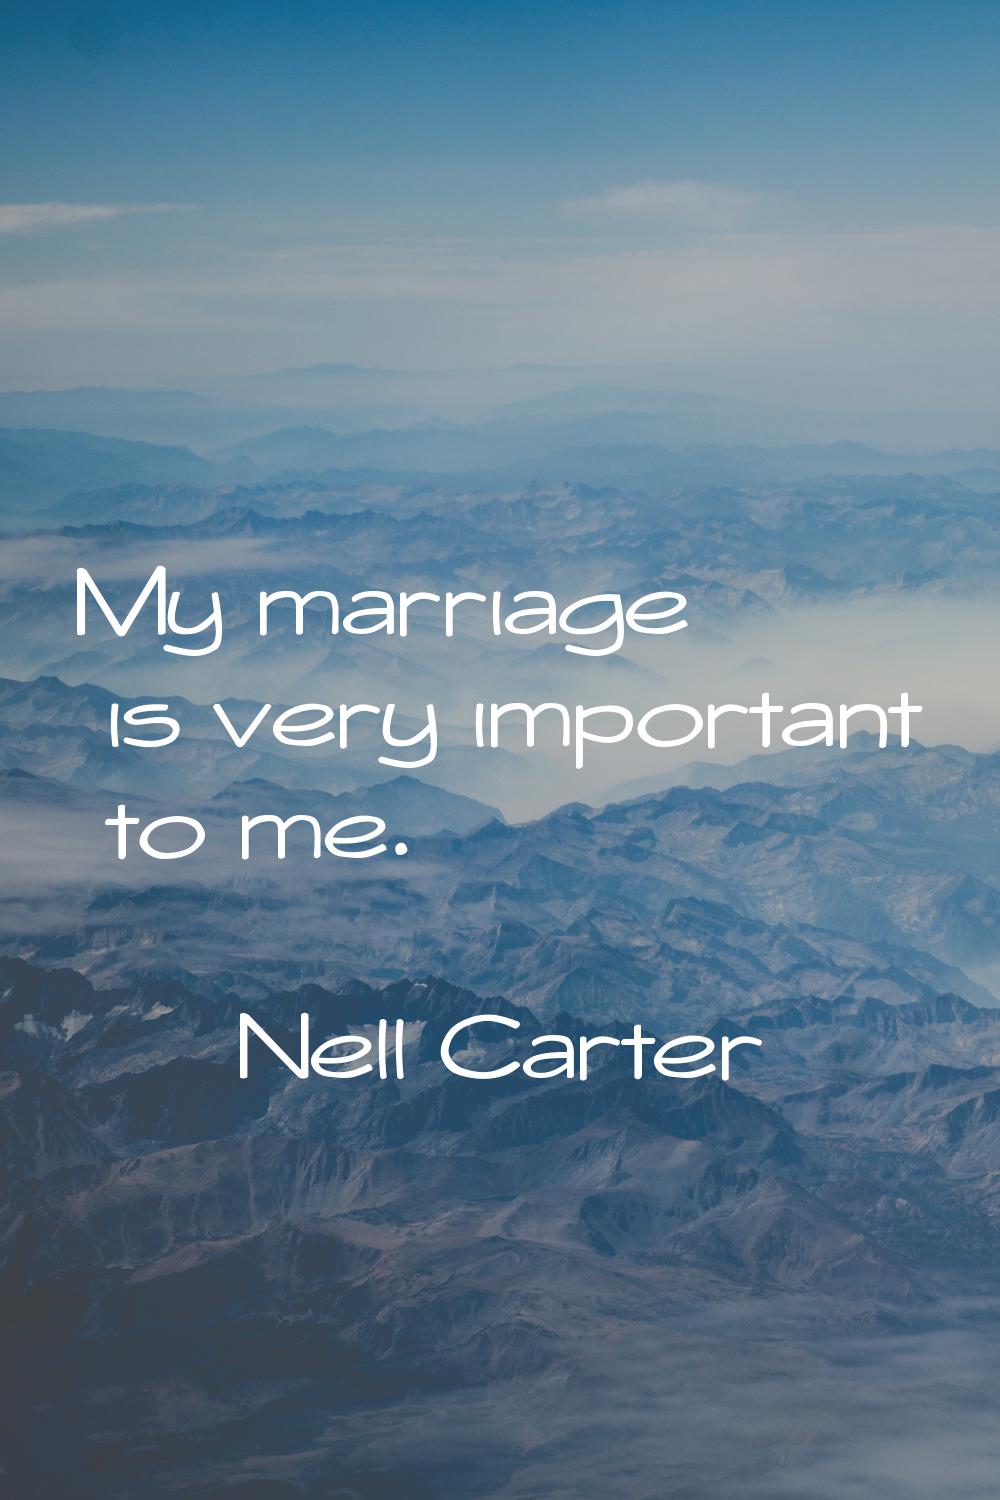 My marriage is very important to me.